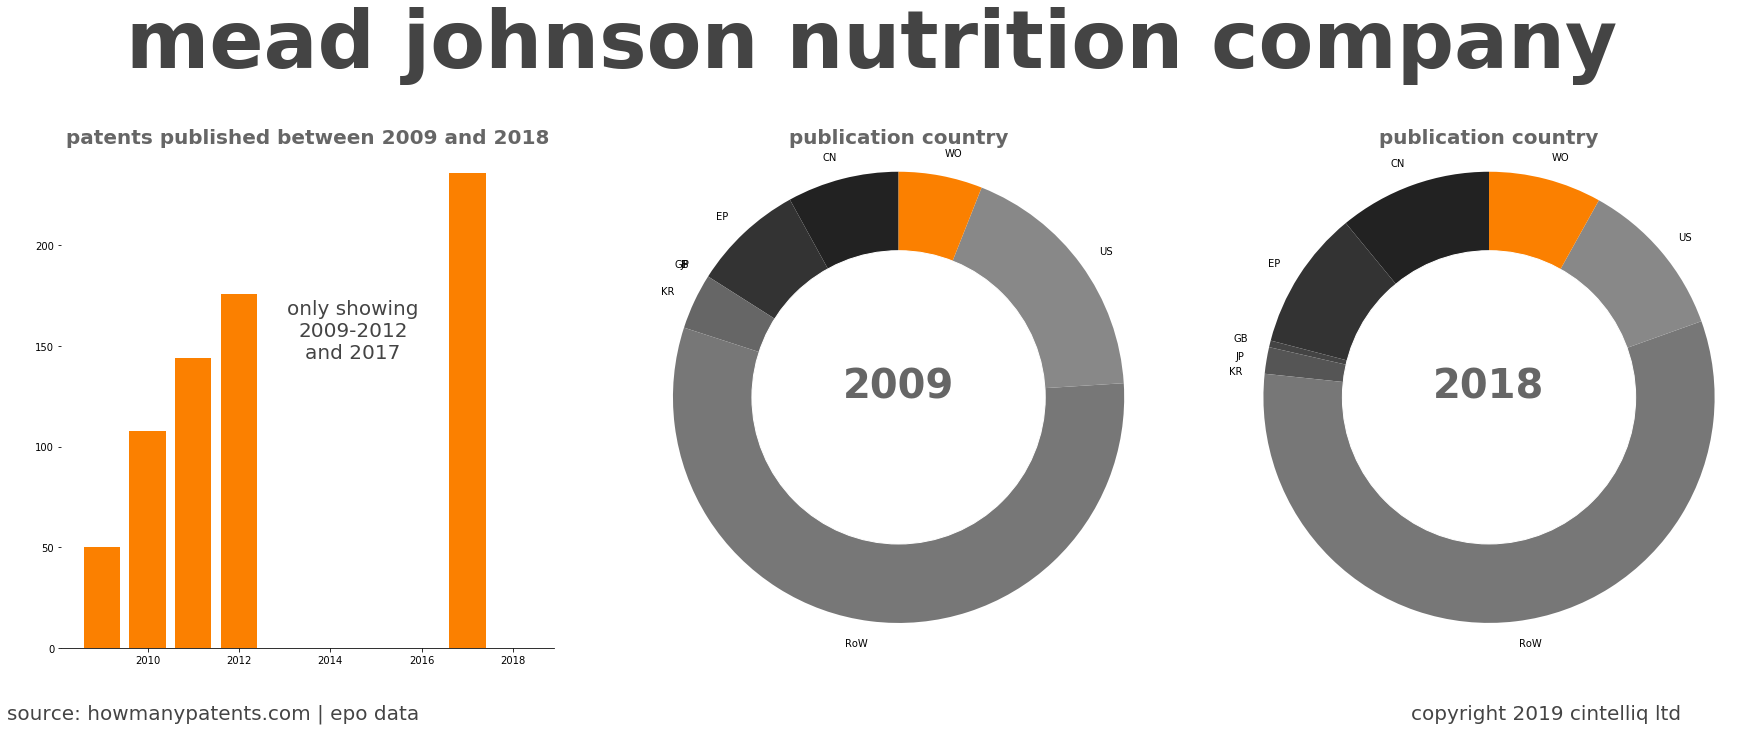 summary of patents for Mead Johnson Nutrition Company